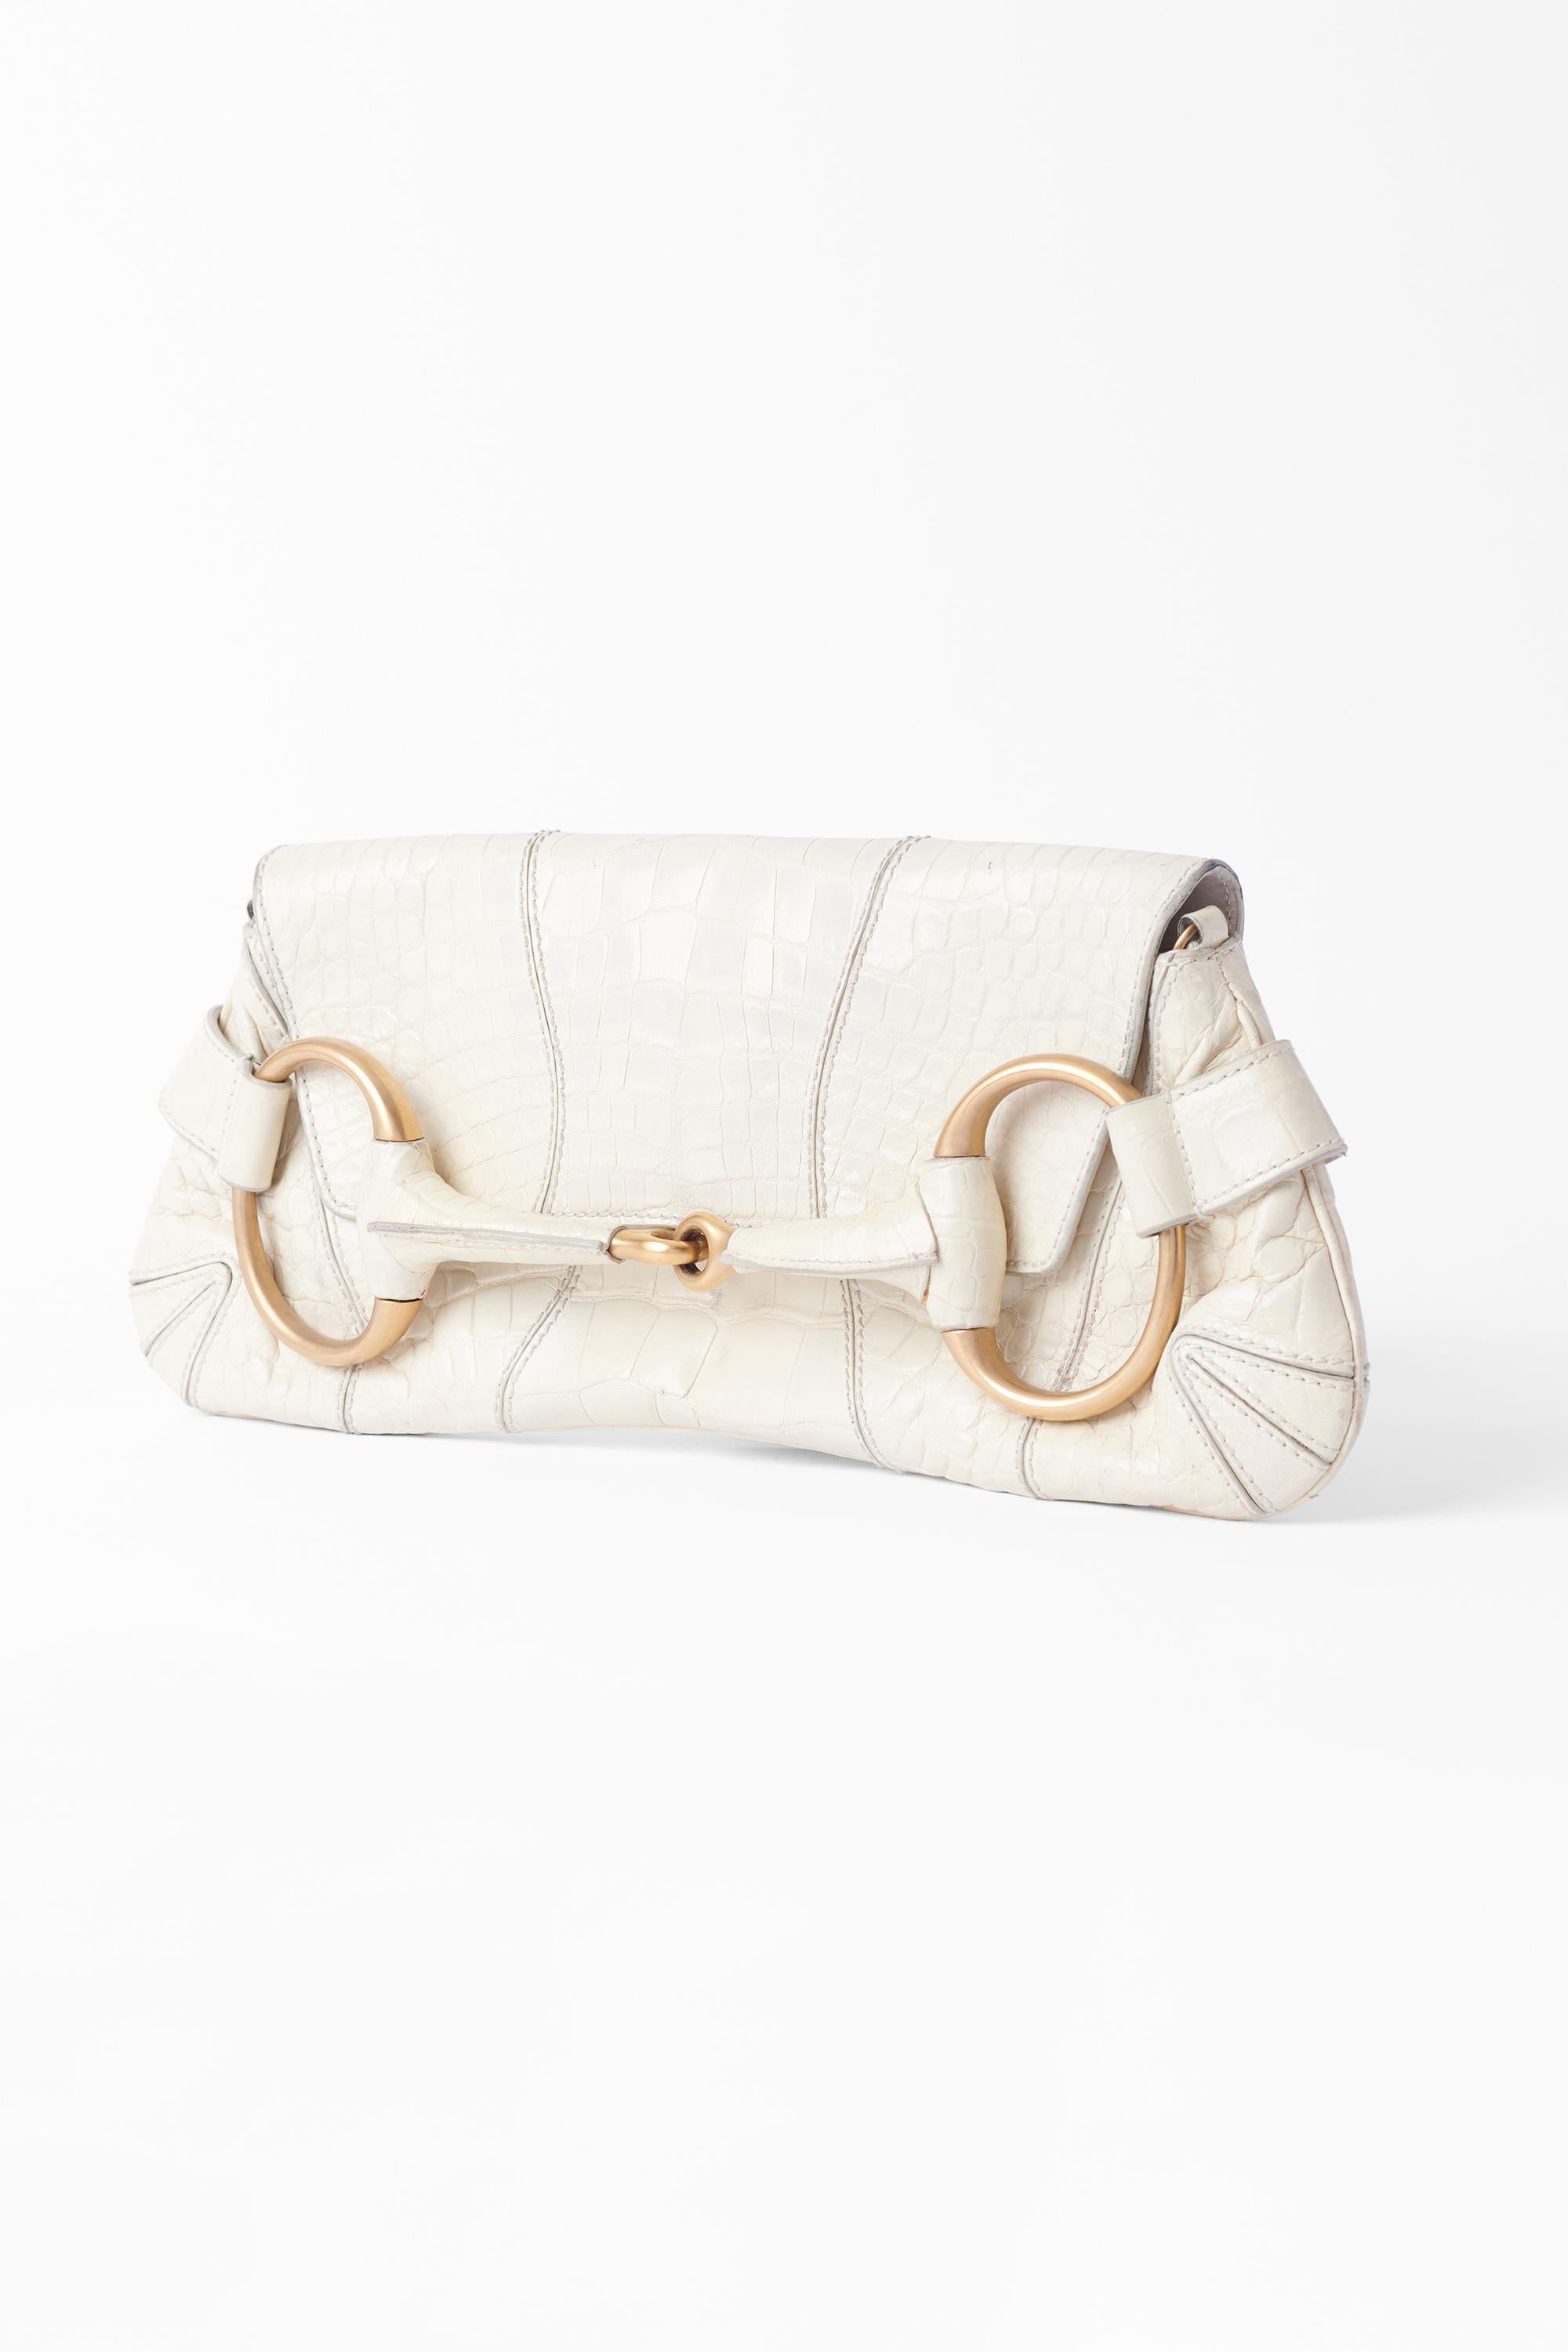 We are excited to present this incredibly iconic Tom Ford for Gucci Fall Winter 2003 cream crocodile clutch. As seen on the runway, look 11 & 40 - collectors item. Features signature horsebit detailing, crocodile leather skin, detachable chain strap